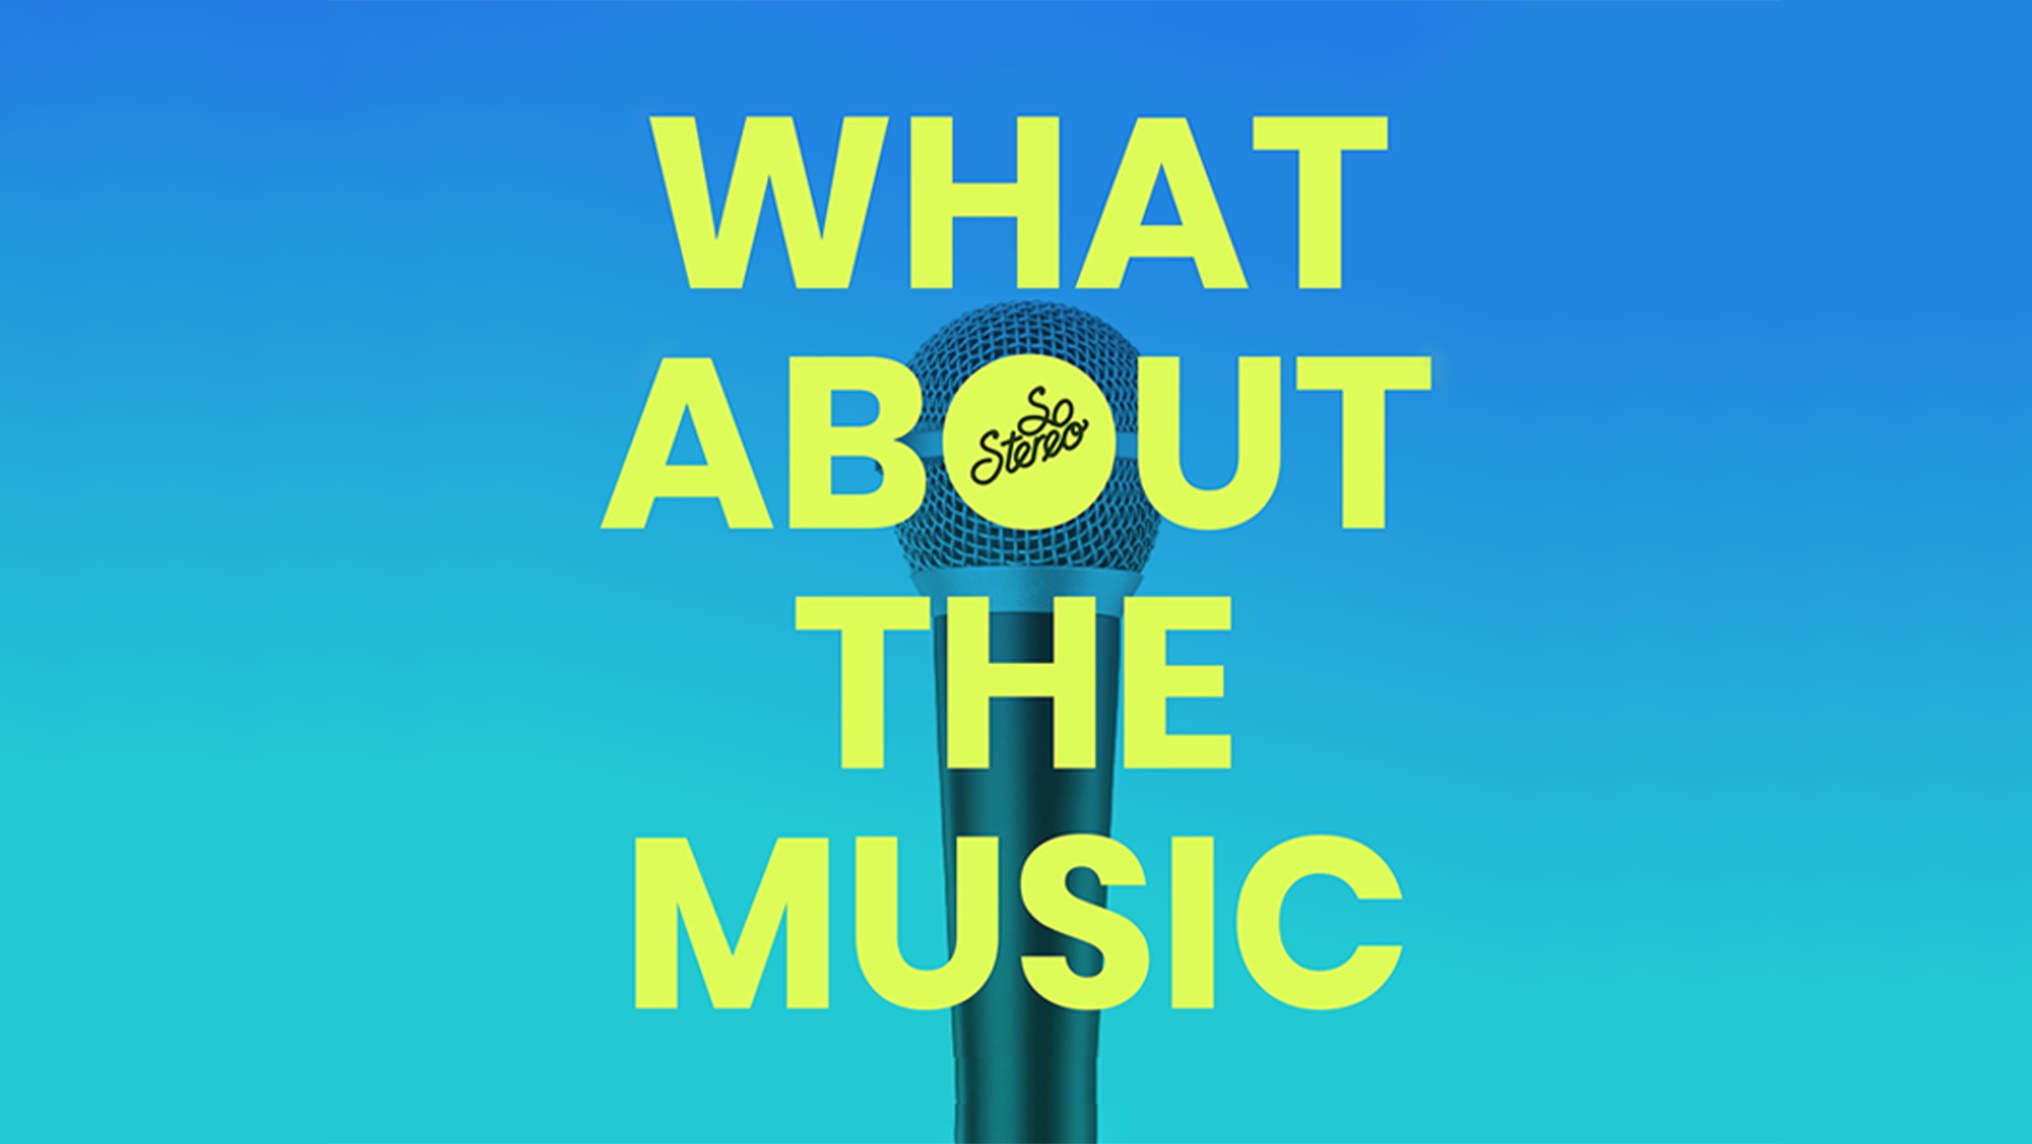 adam&eveDDB's Bryan Barnes and Shannon Murphy Featured on SoStereo’s ‘What About the Music’ Podcast